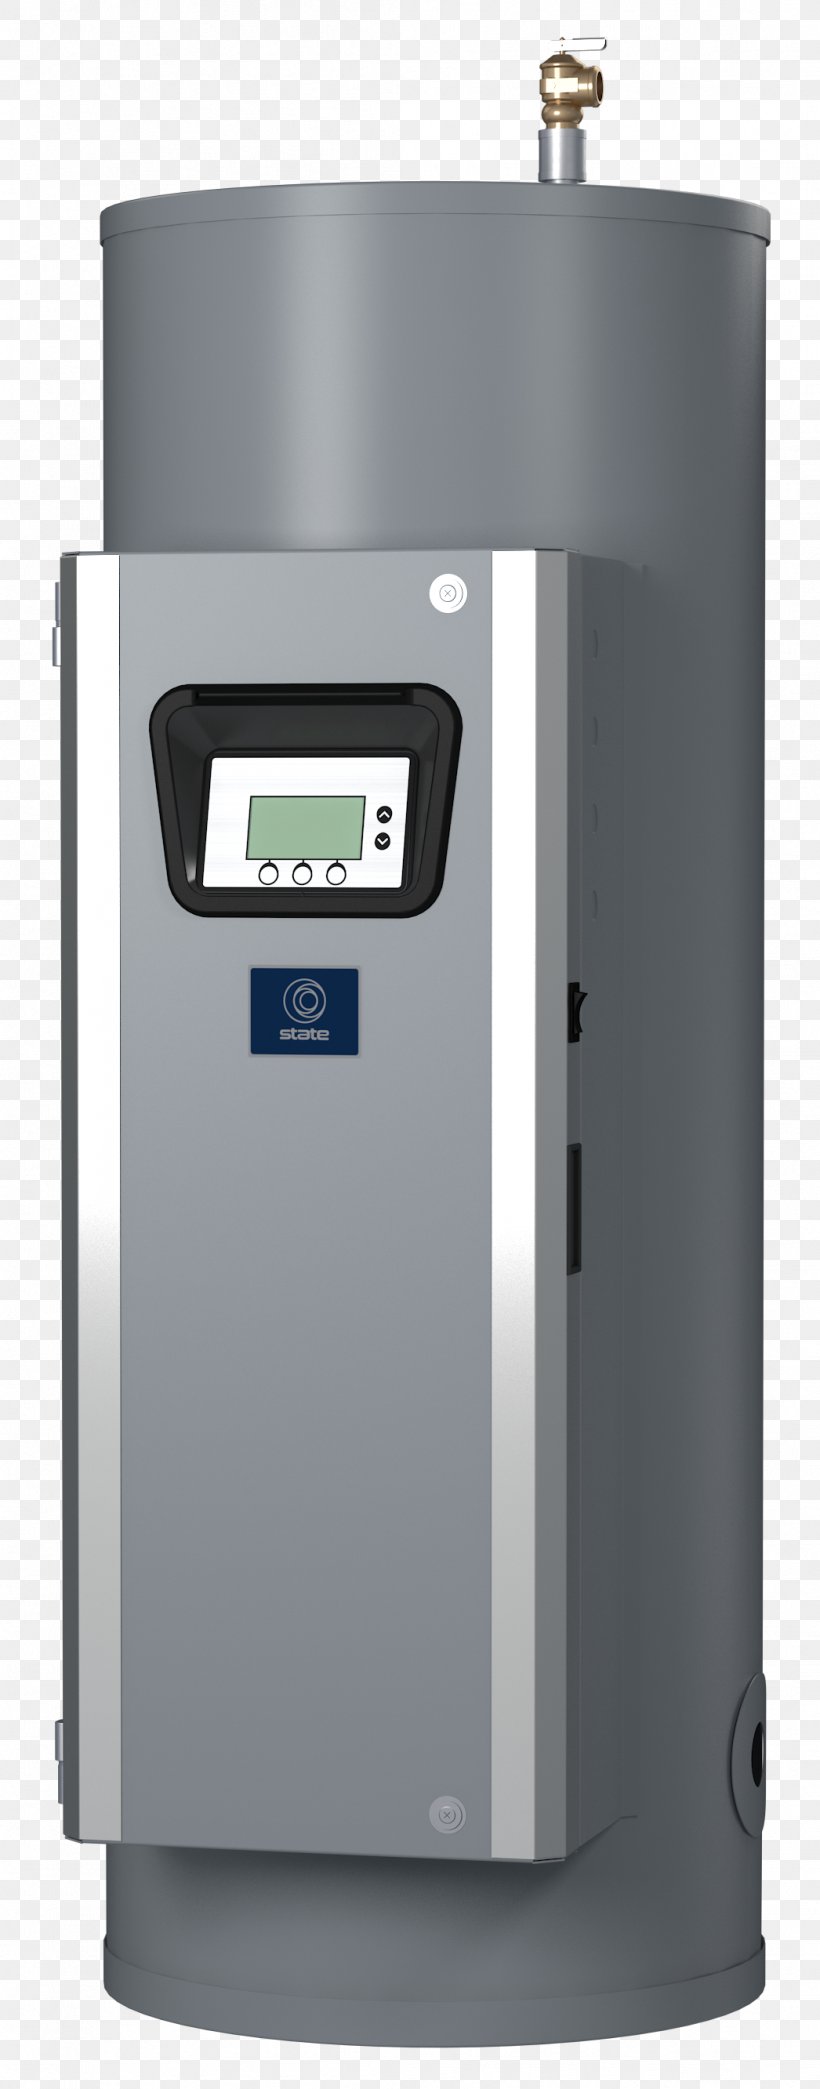 Water Heating A. O. Smith Water Products Company Electricity Fan Heater, PNG, 1046x2665px, Water Heating, Chimney, Electricity, Fan Heater, Heat Download Free